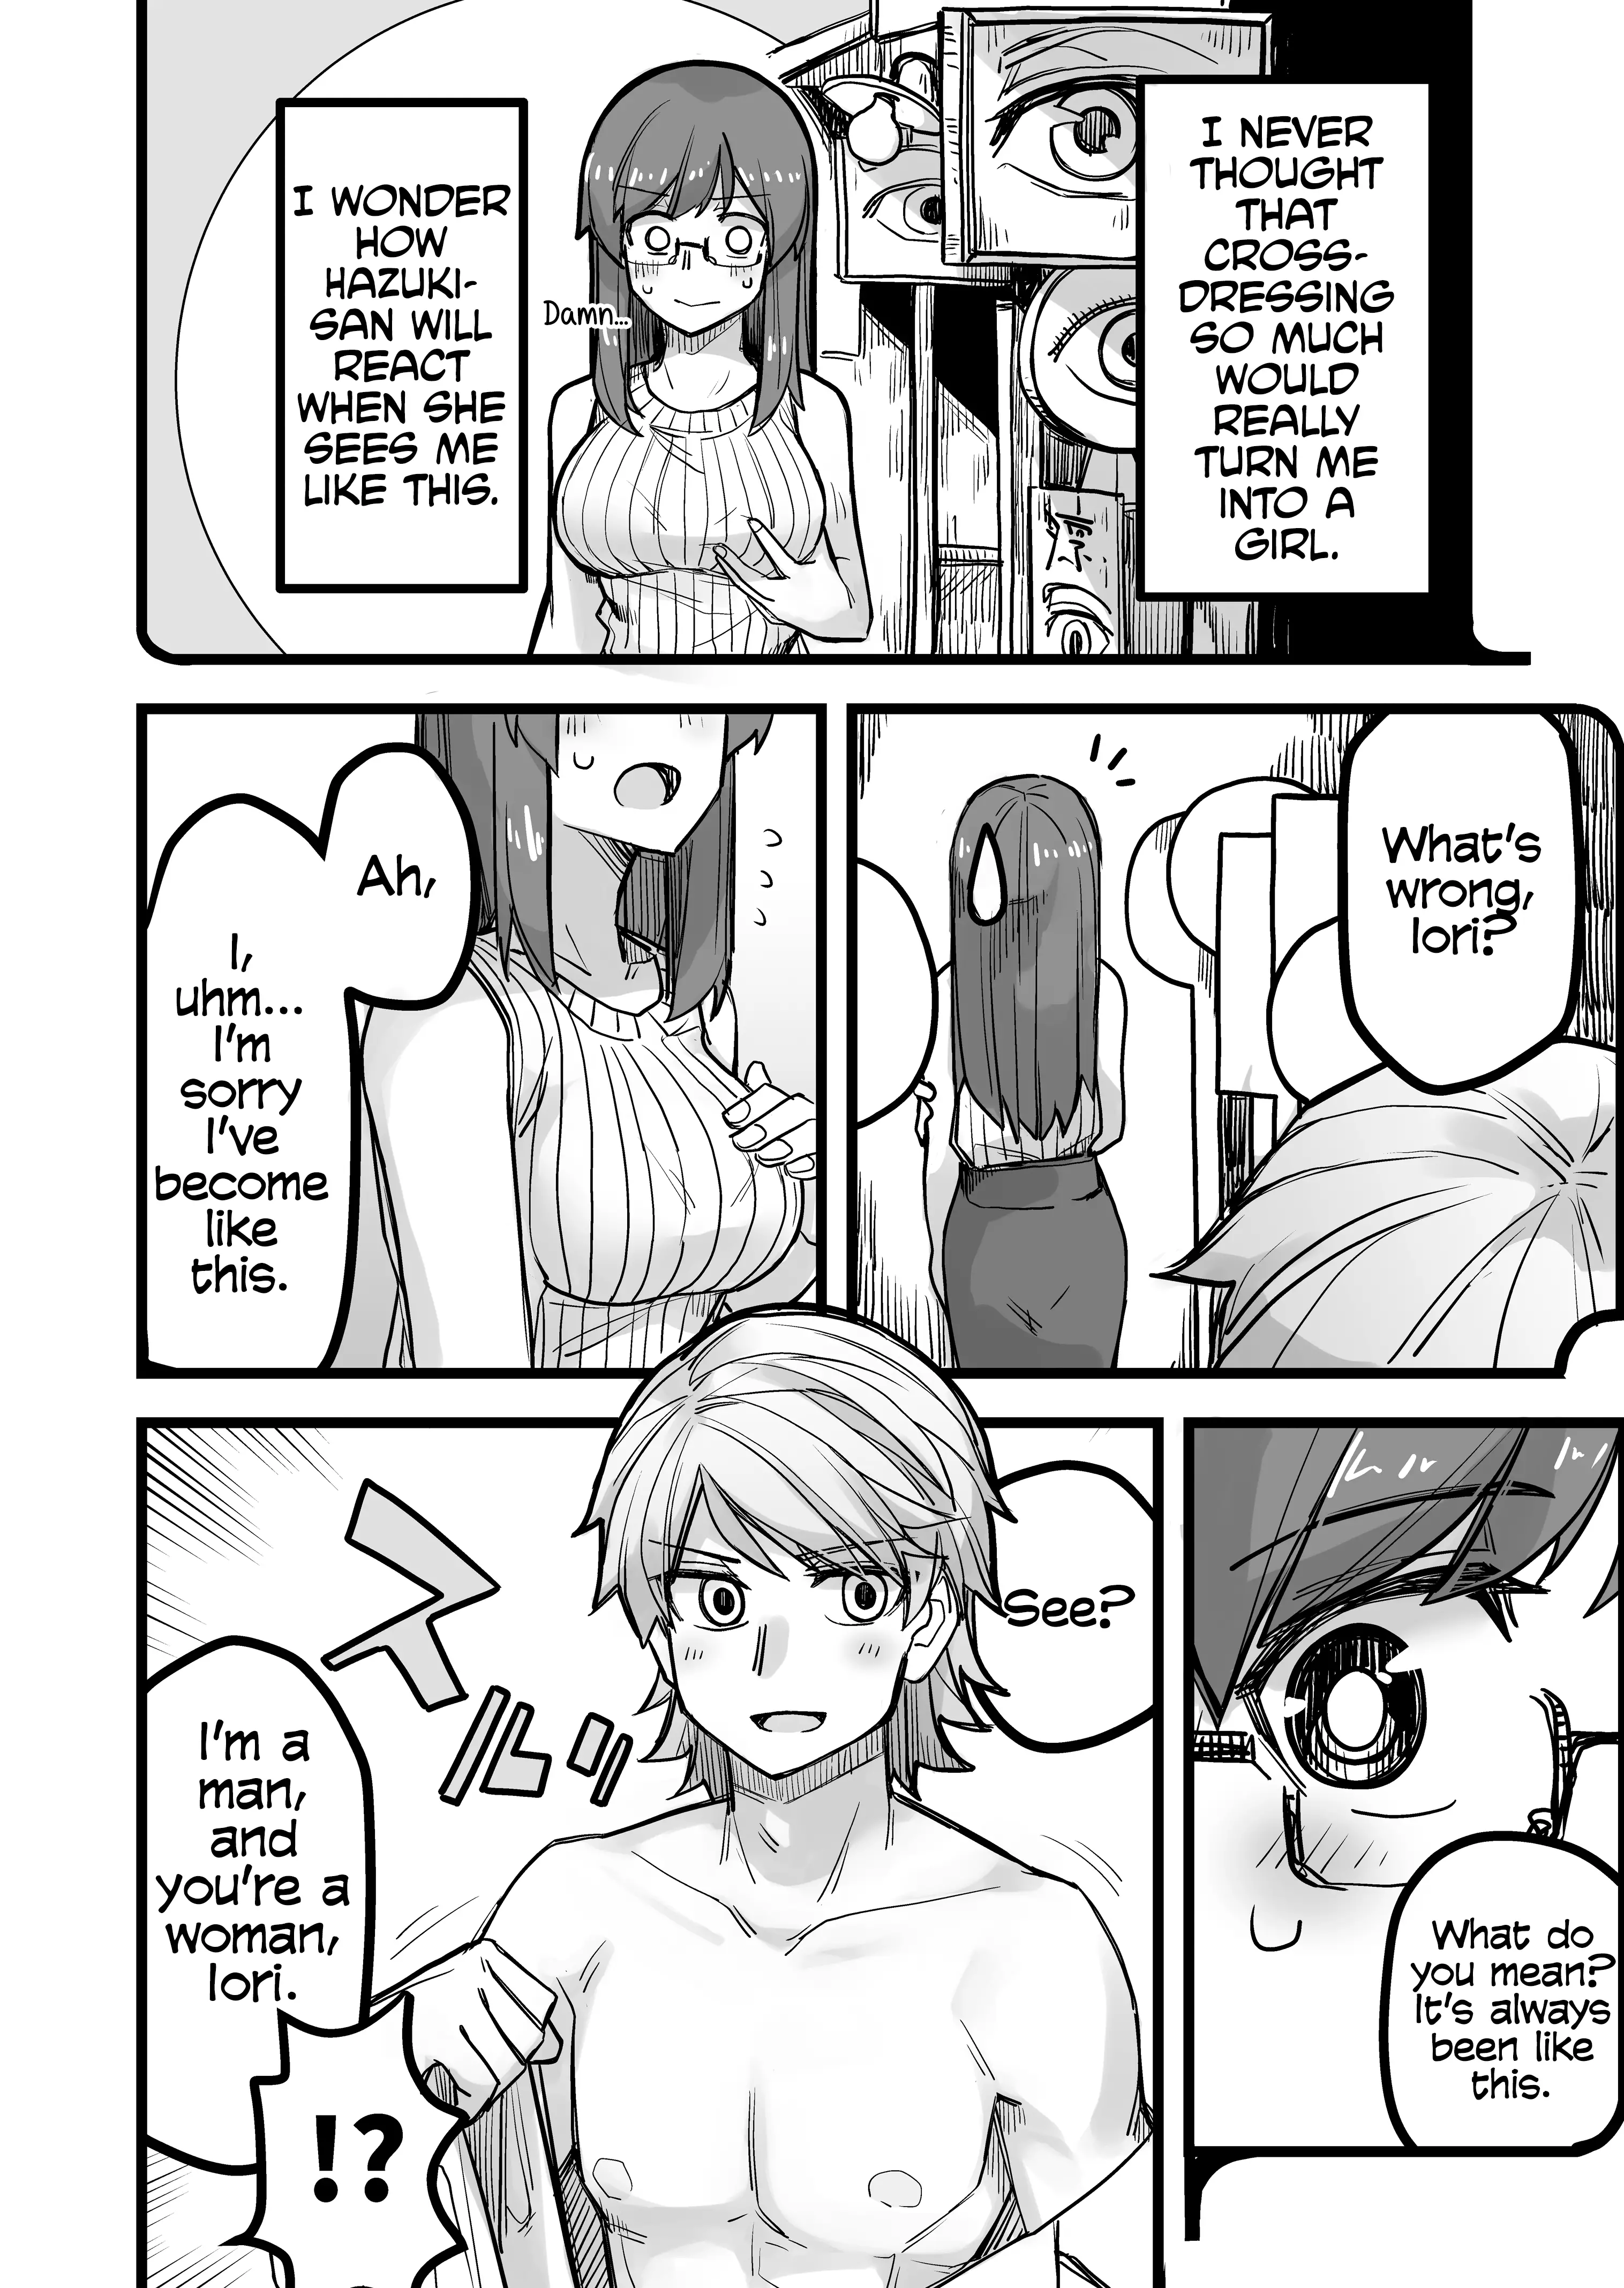 While Cross-Dressing, I Was Hit On By A Handsome Guy! - 38 page 2-359996da